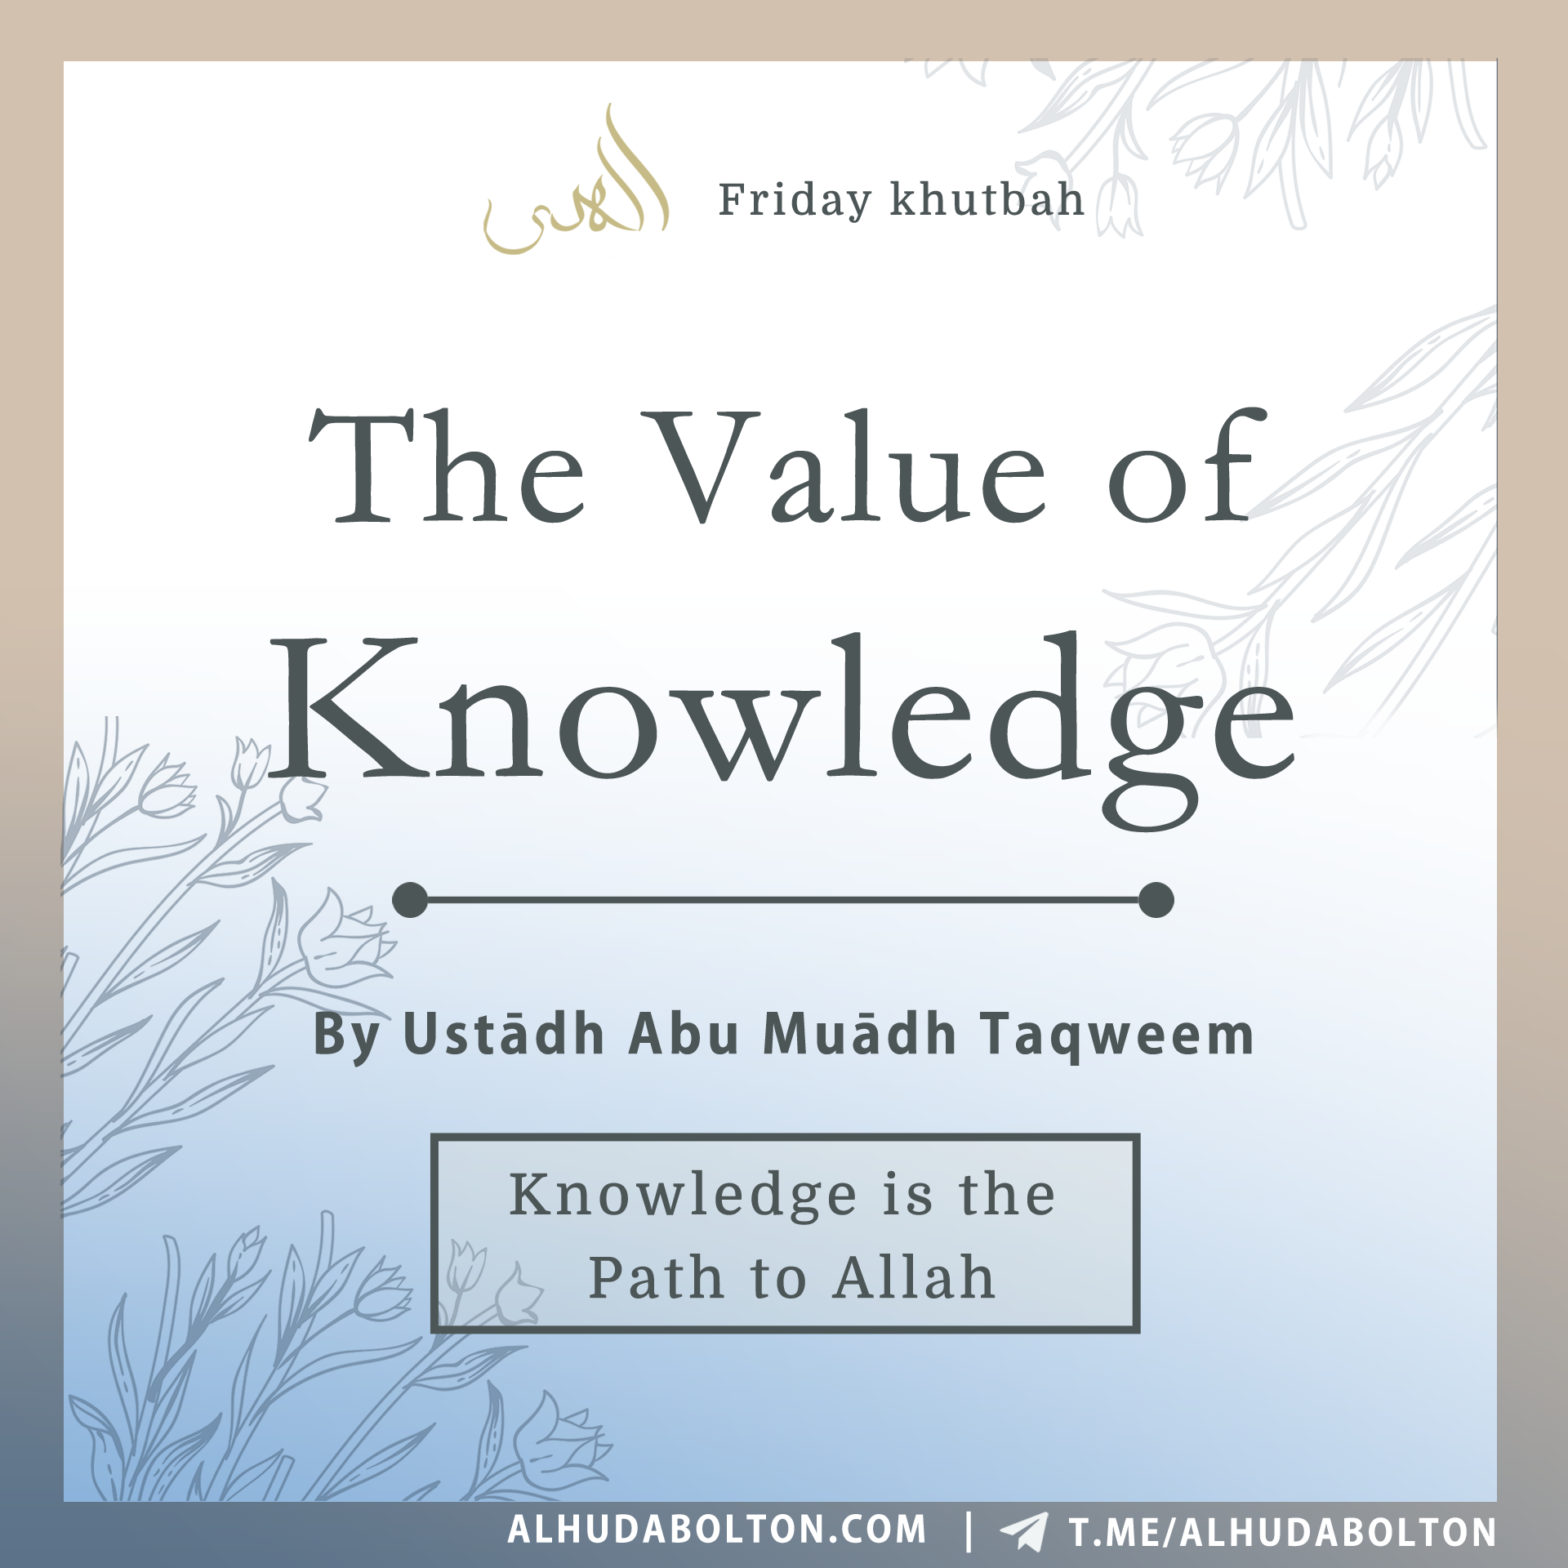 Khutbah: The Value of Knowledge